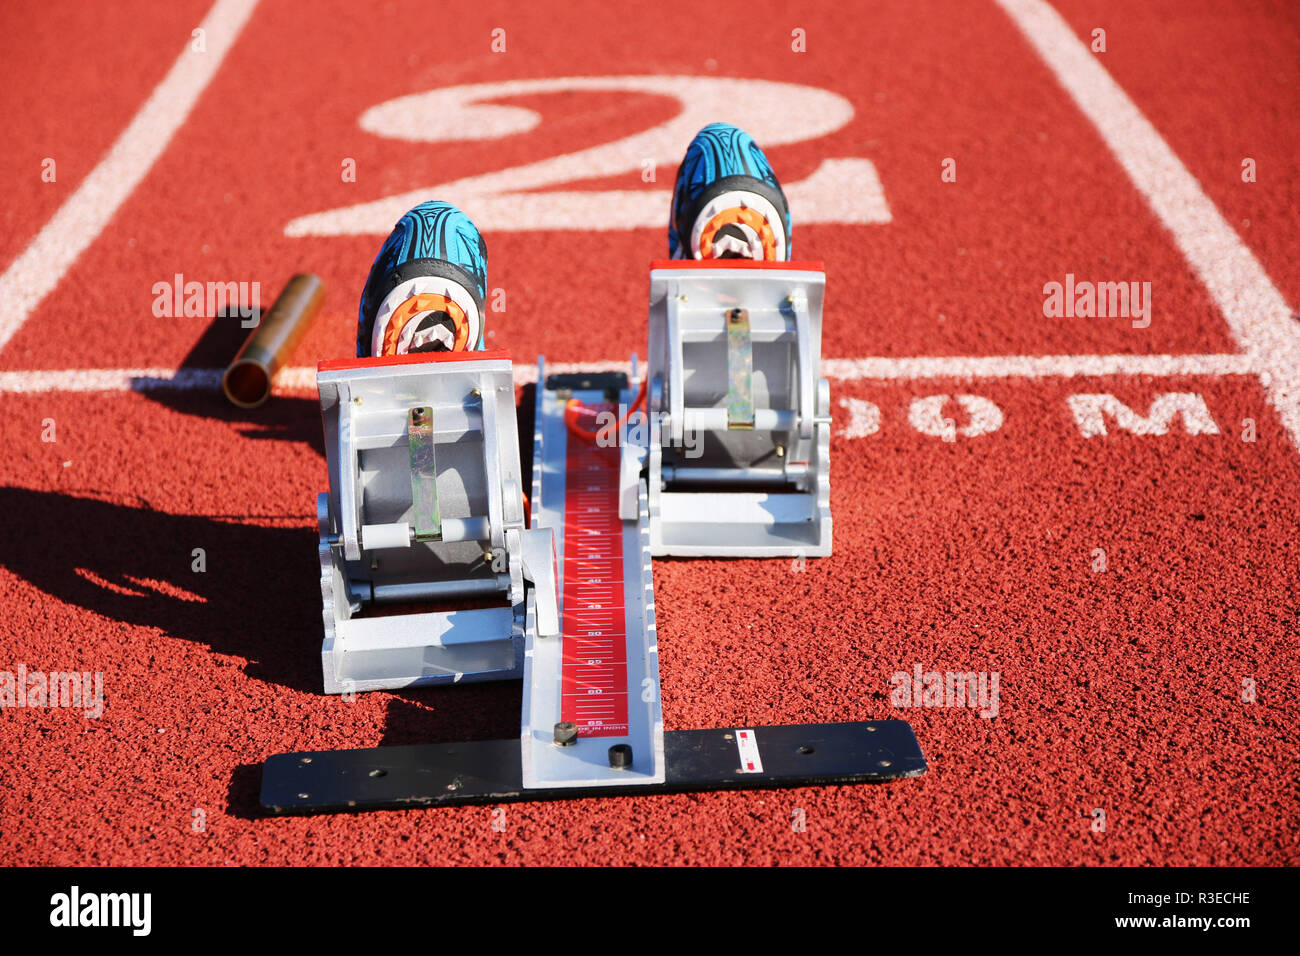 A set of starting blocks set up in lane 2 with a pair of spikes in them and a baton next to them ready for a race. Stock Photo